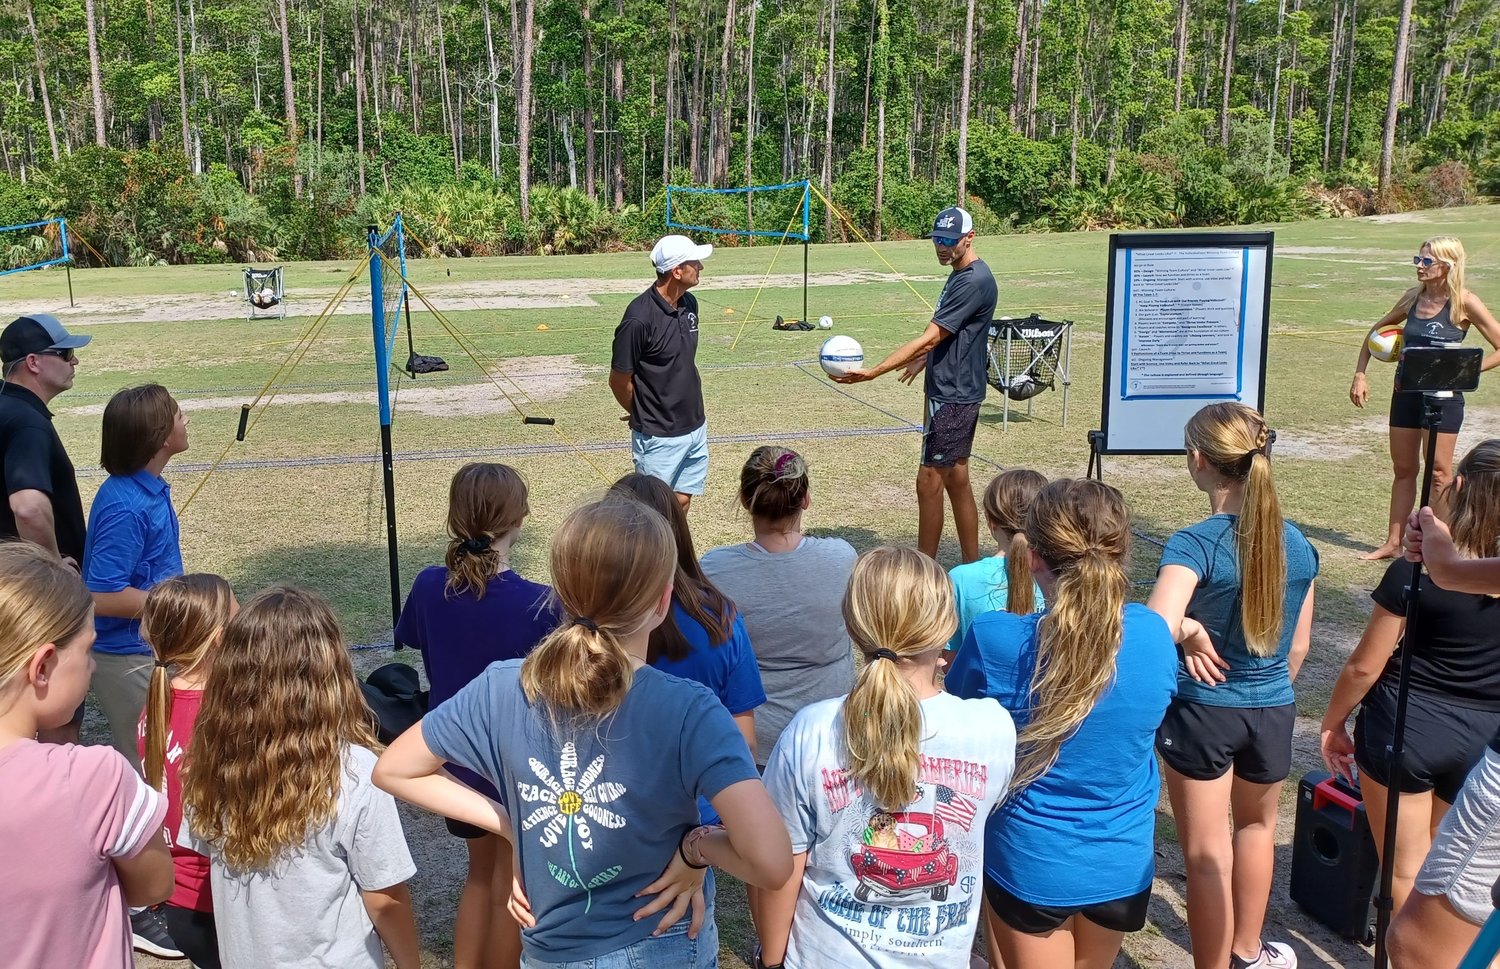 Olympic gold medalist Phil Dalhausser discusses technique with a youth volleyball class at Nocatee Community Park. Looking on are Andor Gyulai, left, and Vanessa Summers-Gyulai, right.